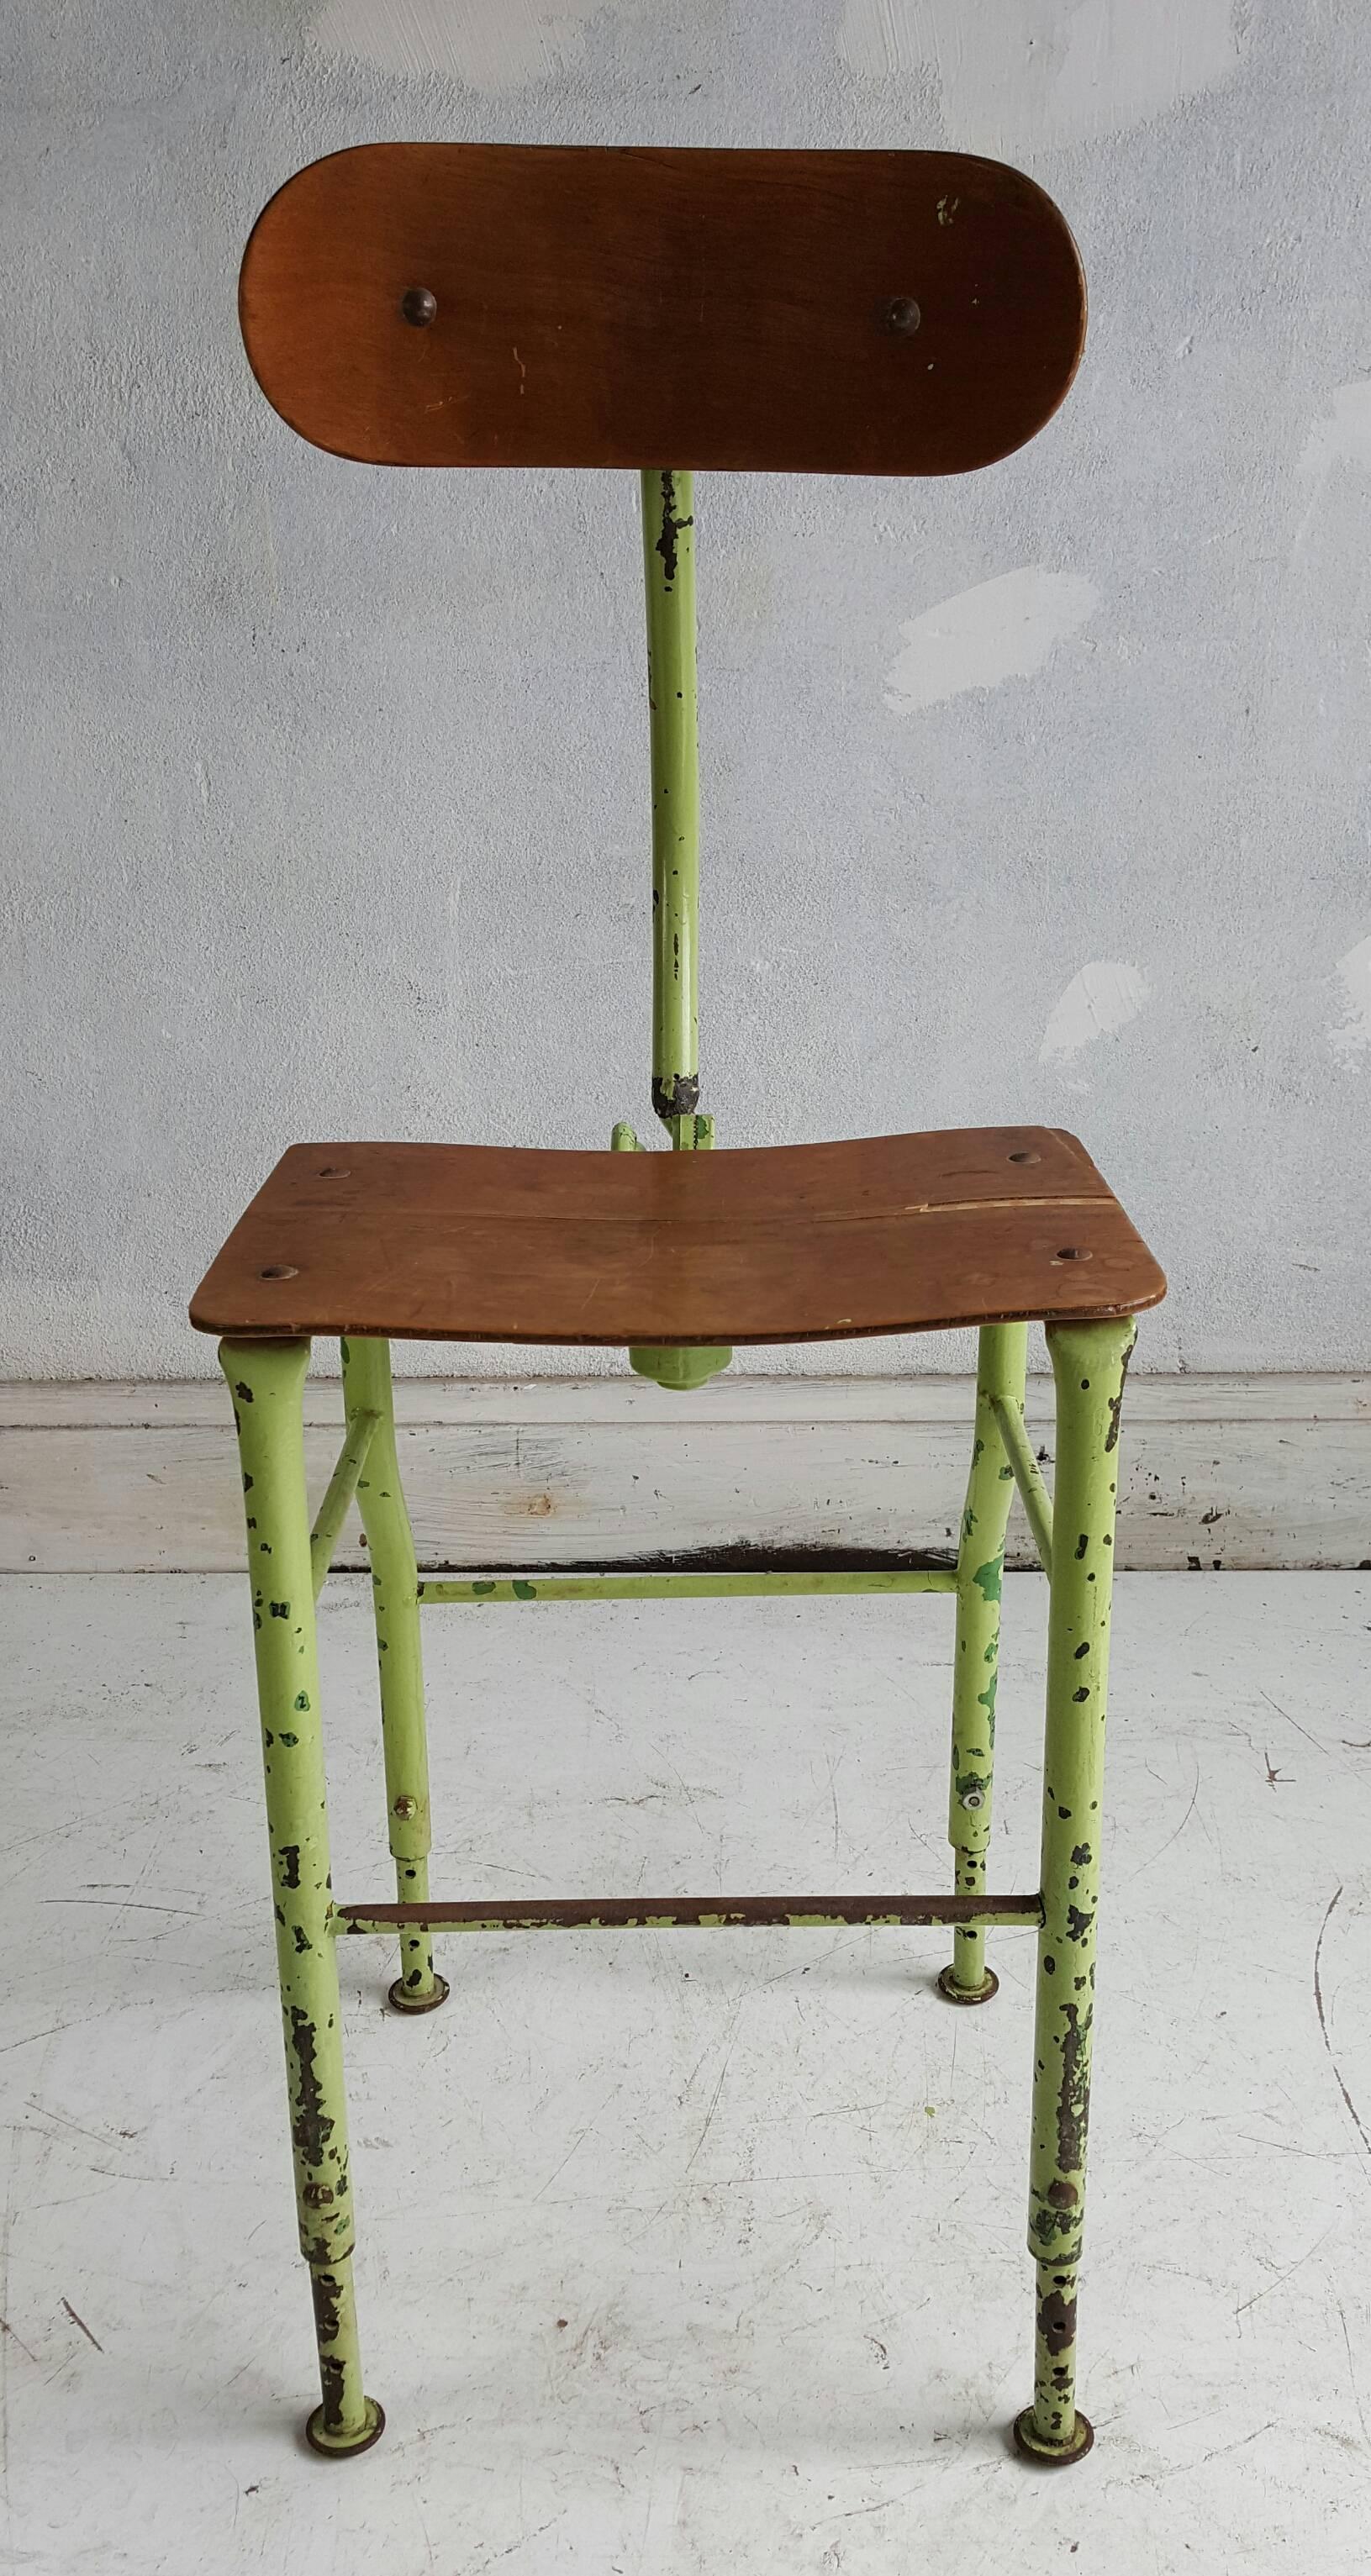 Sculptural Industrial Medical /Drafting Stool In Distressed Condition In Buffalo, NY